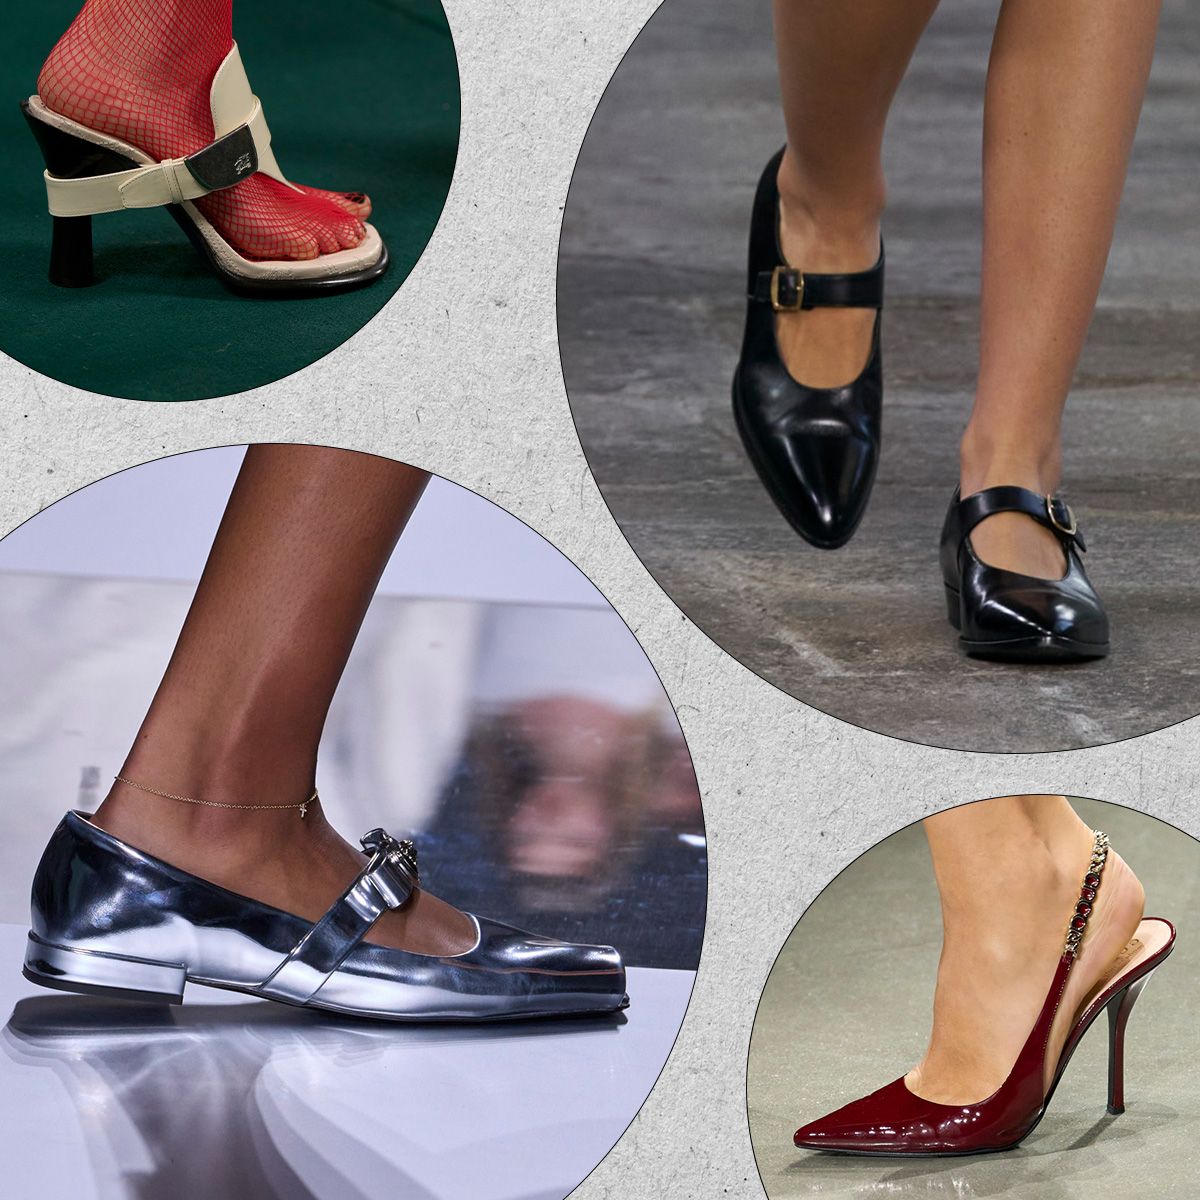  The Most Trending women's Shoes And Sandals In 2022.